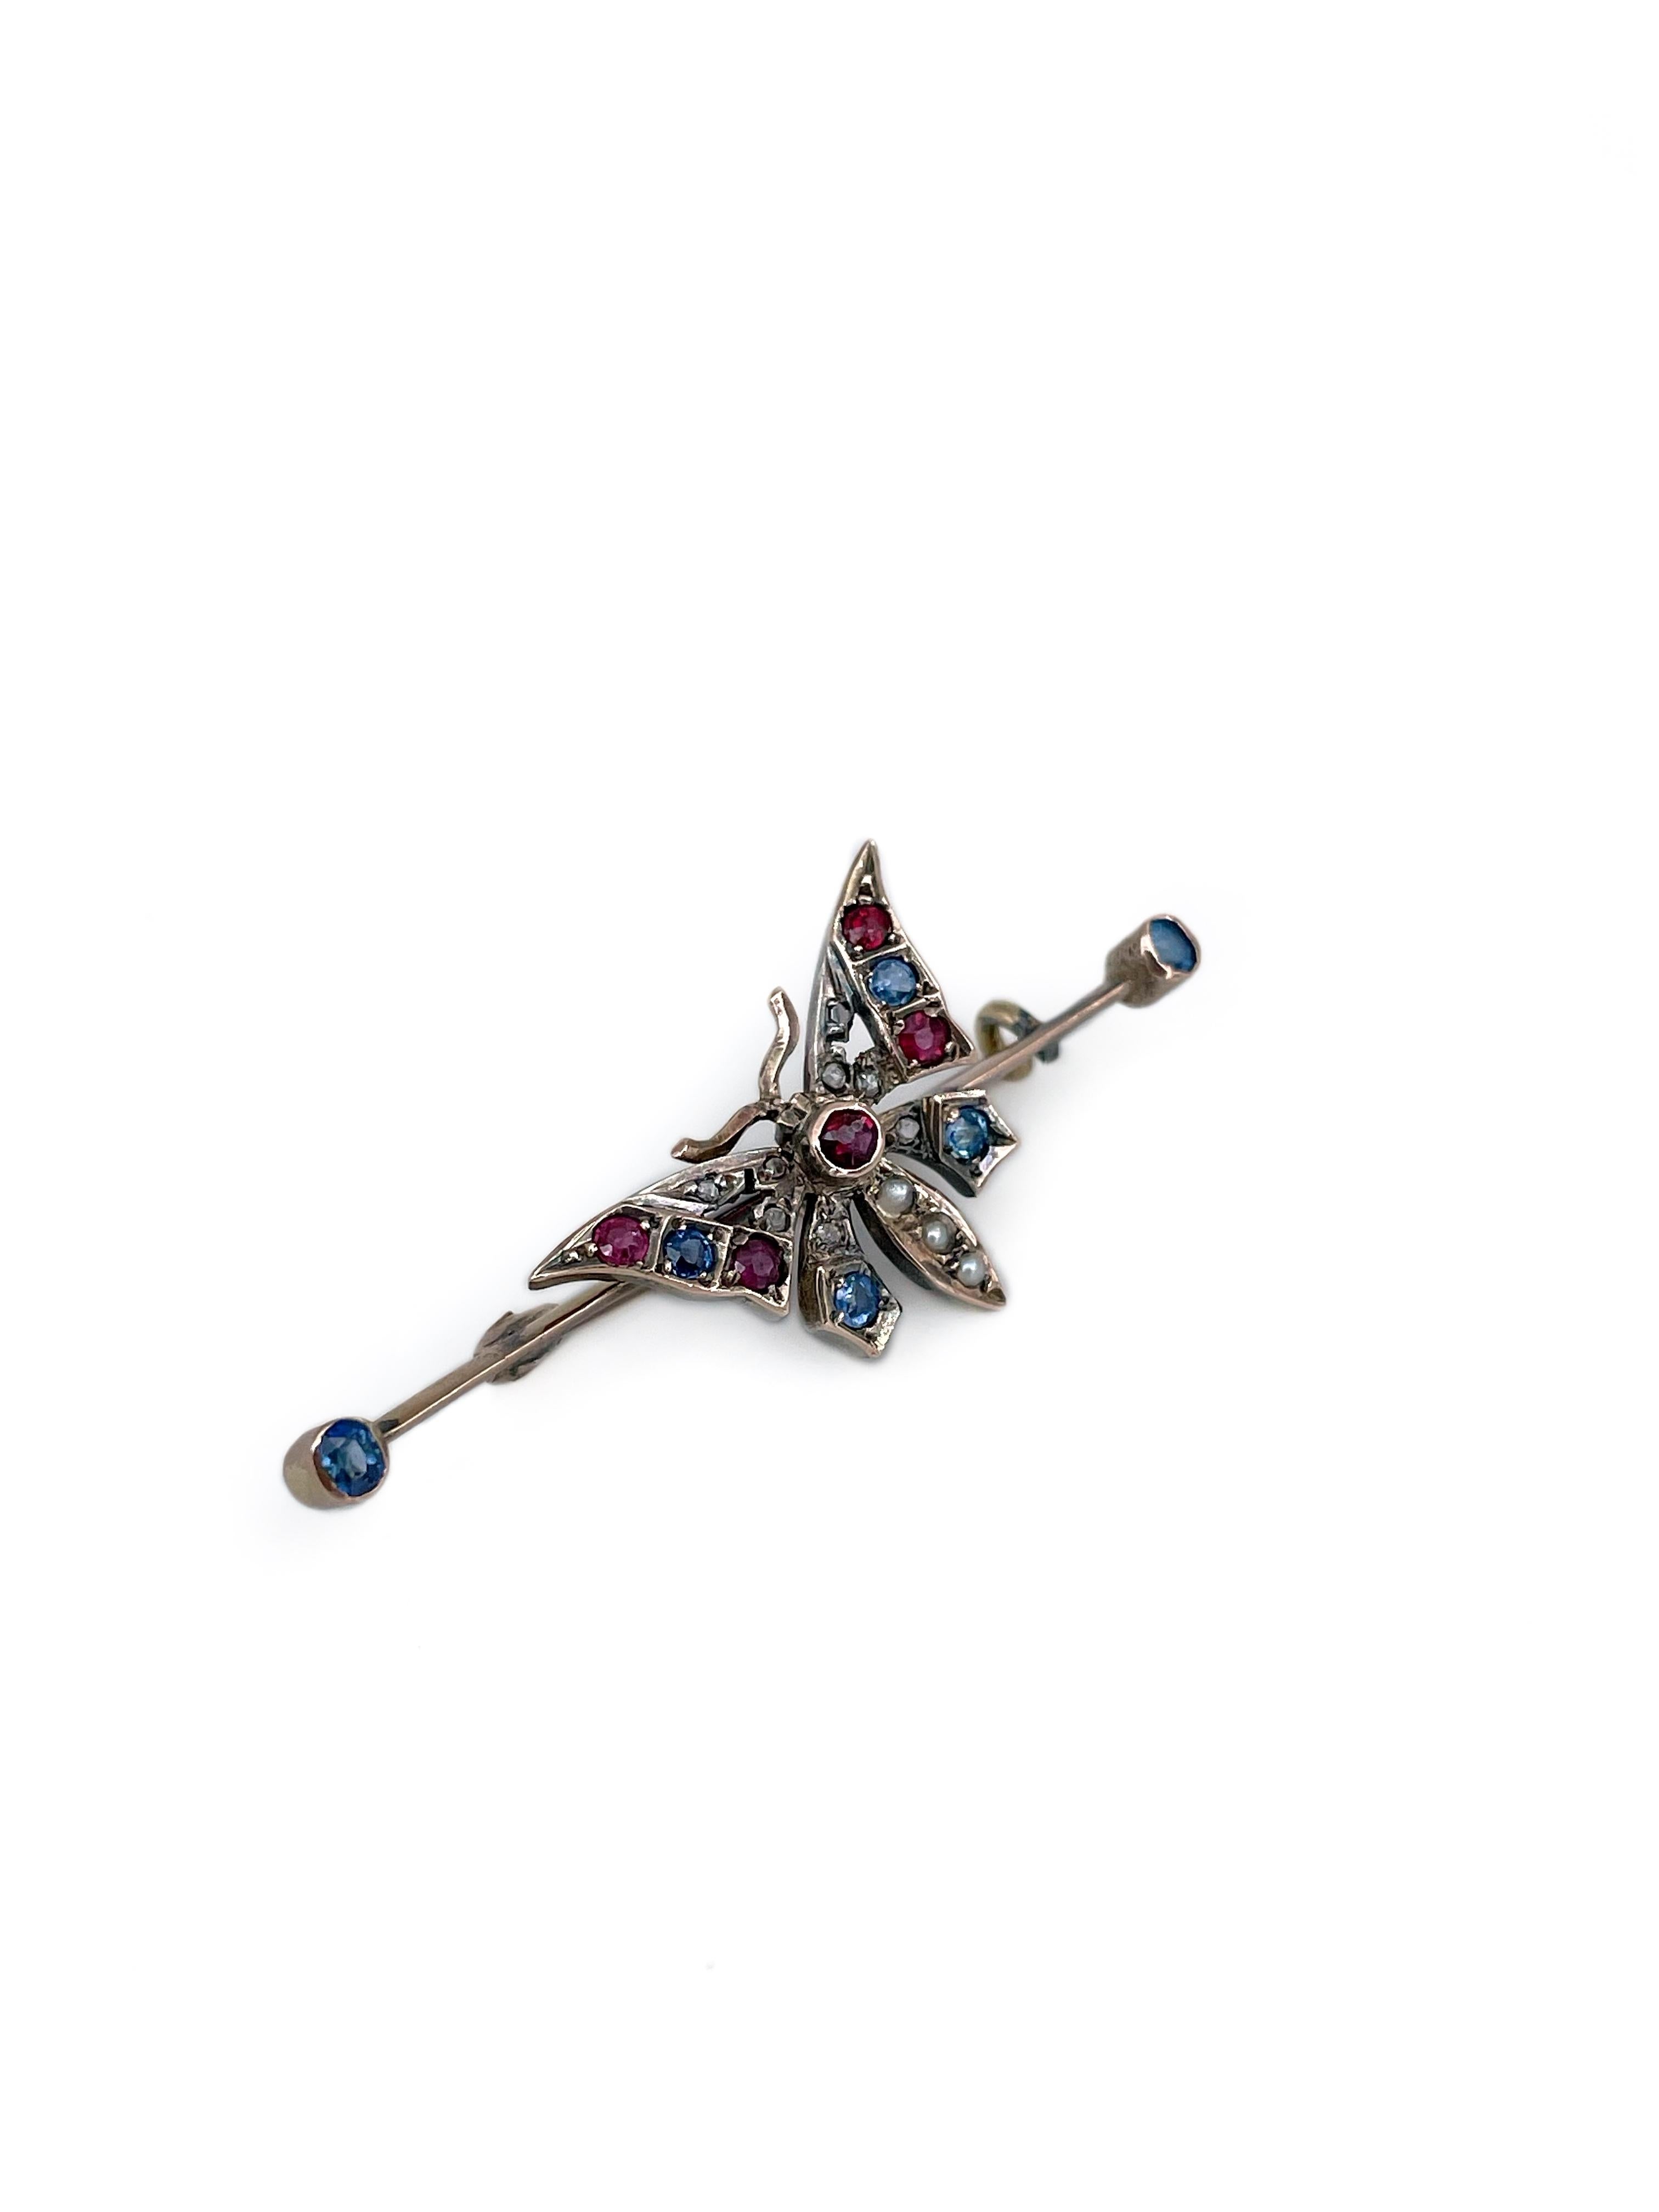 This is a lovely Victorian butterfly bar brooch crafted in 18K gold. Circa 1890. 

Victorian era had an intricate language of symbolism. The butterfly symbolised beauty, transformation and soul. 

The brooch features 6 sapphires, 5 rubies, 3 seed